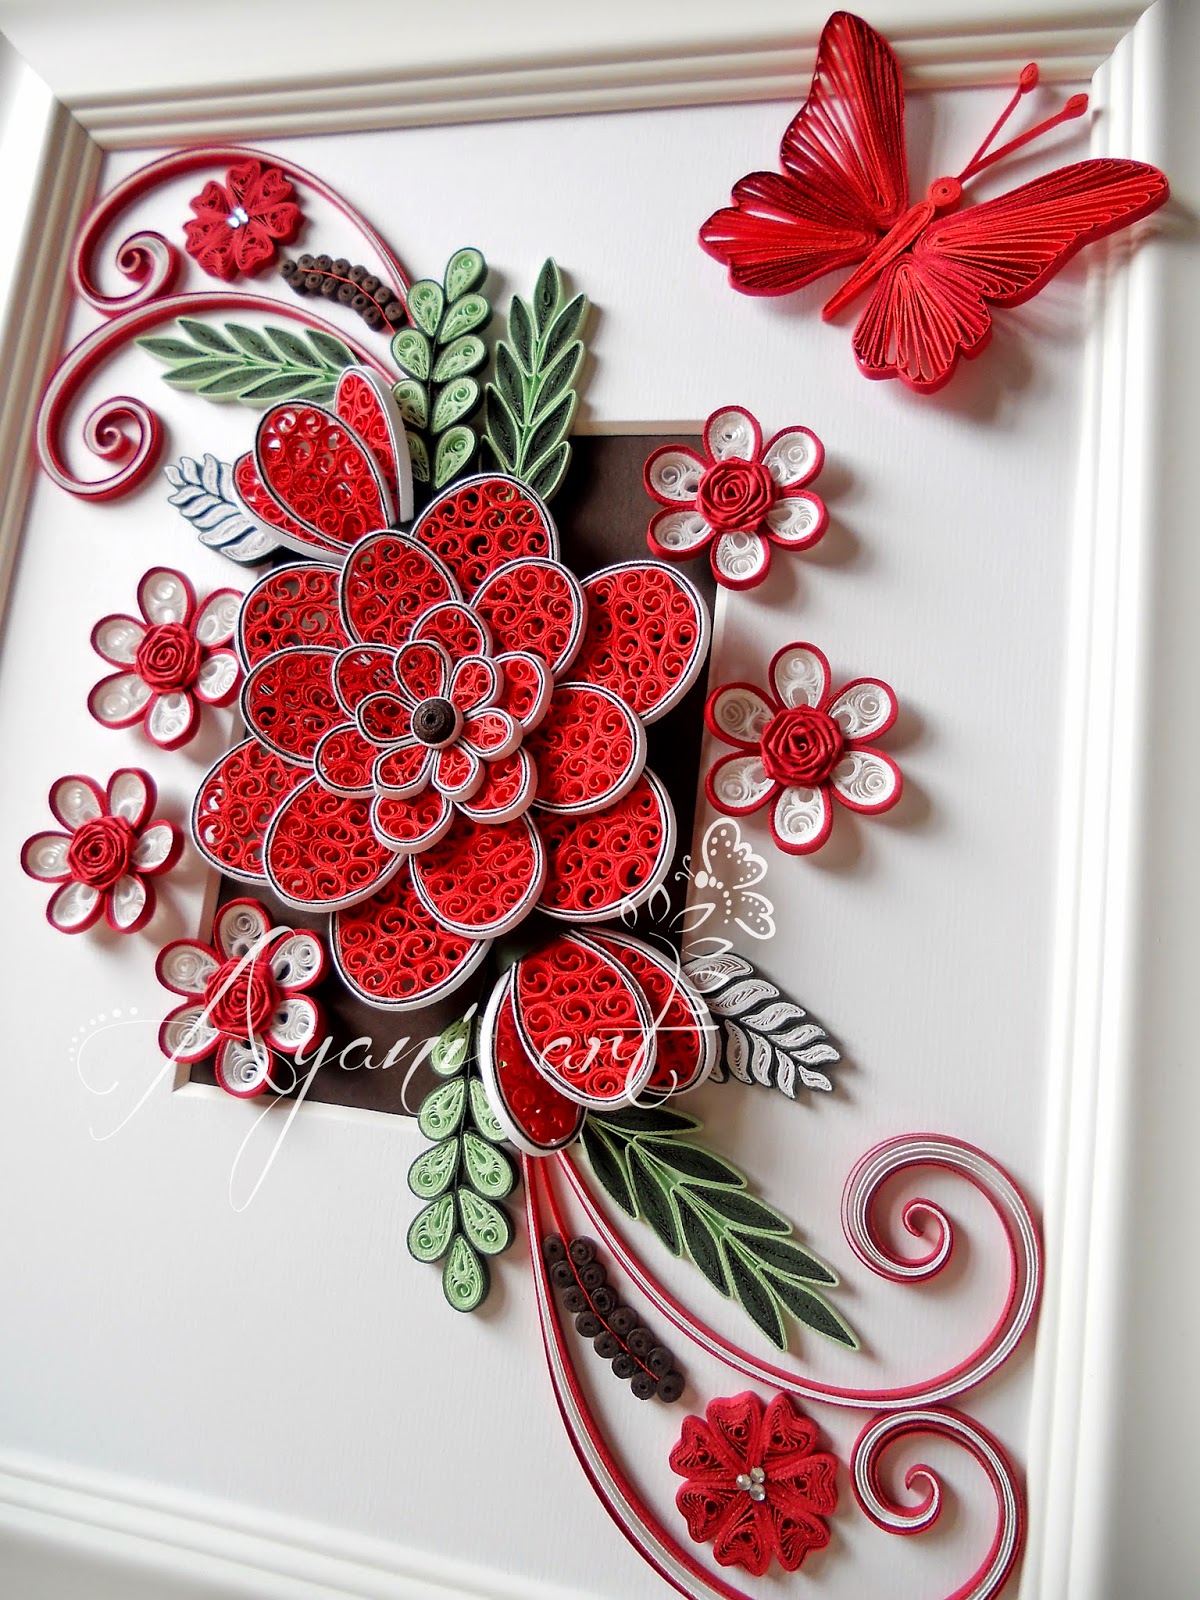 Download Ayani art: Quilling in Red and White